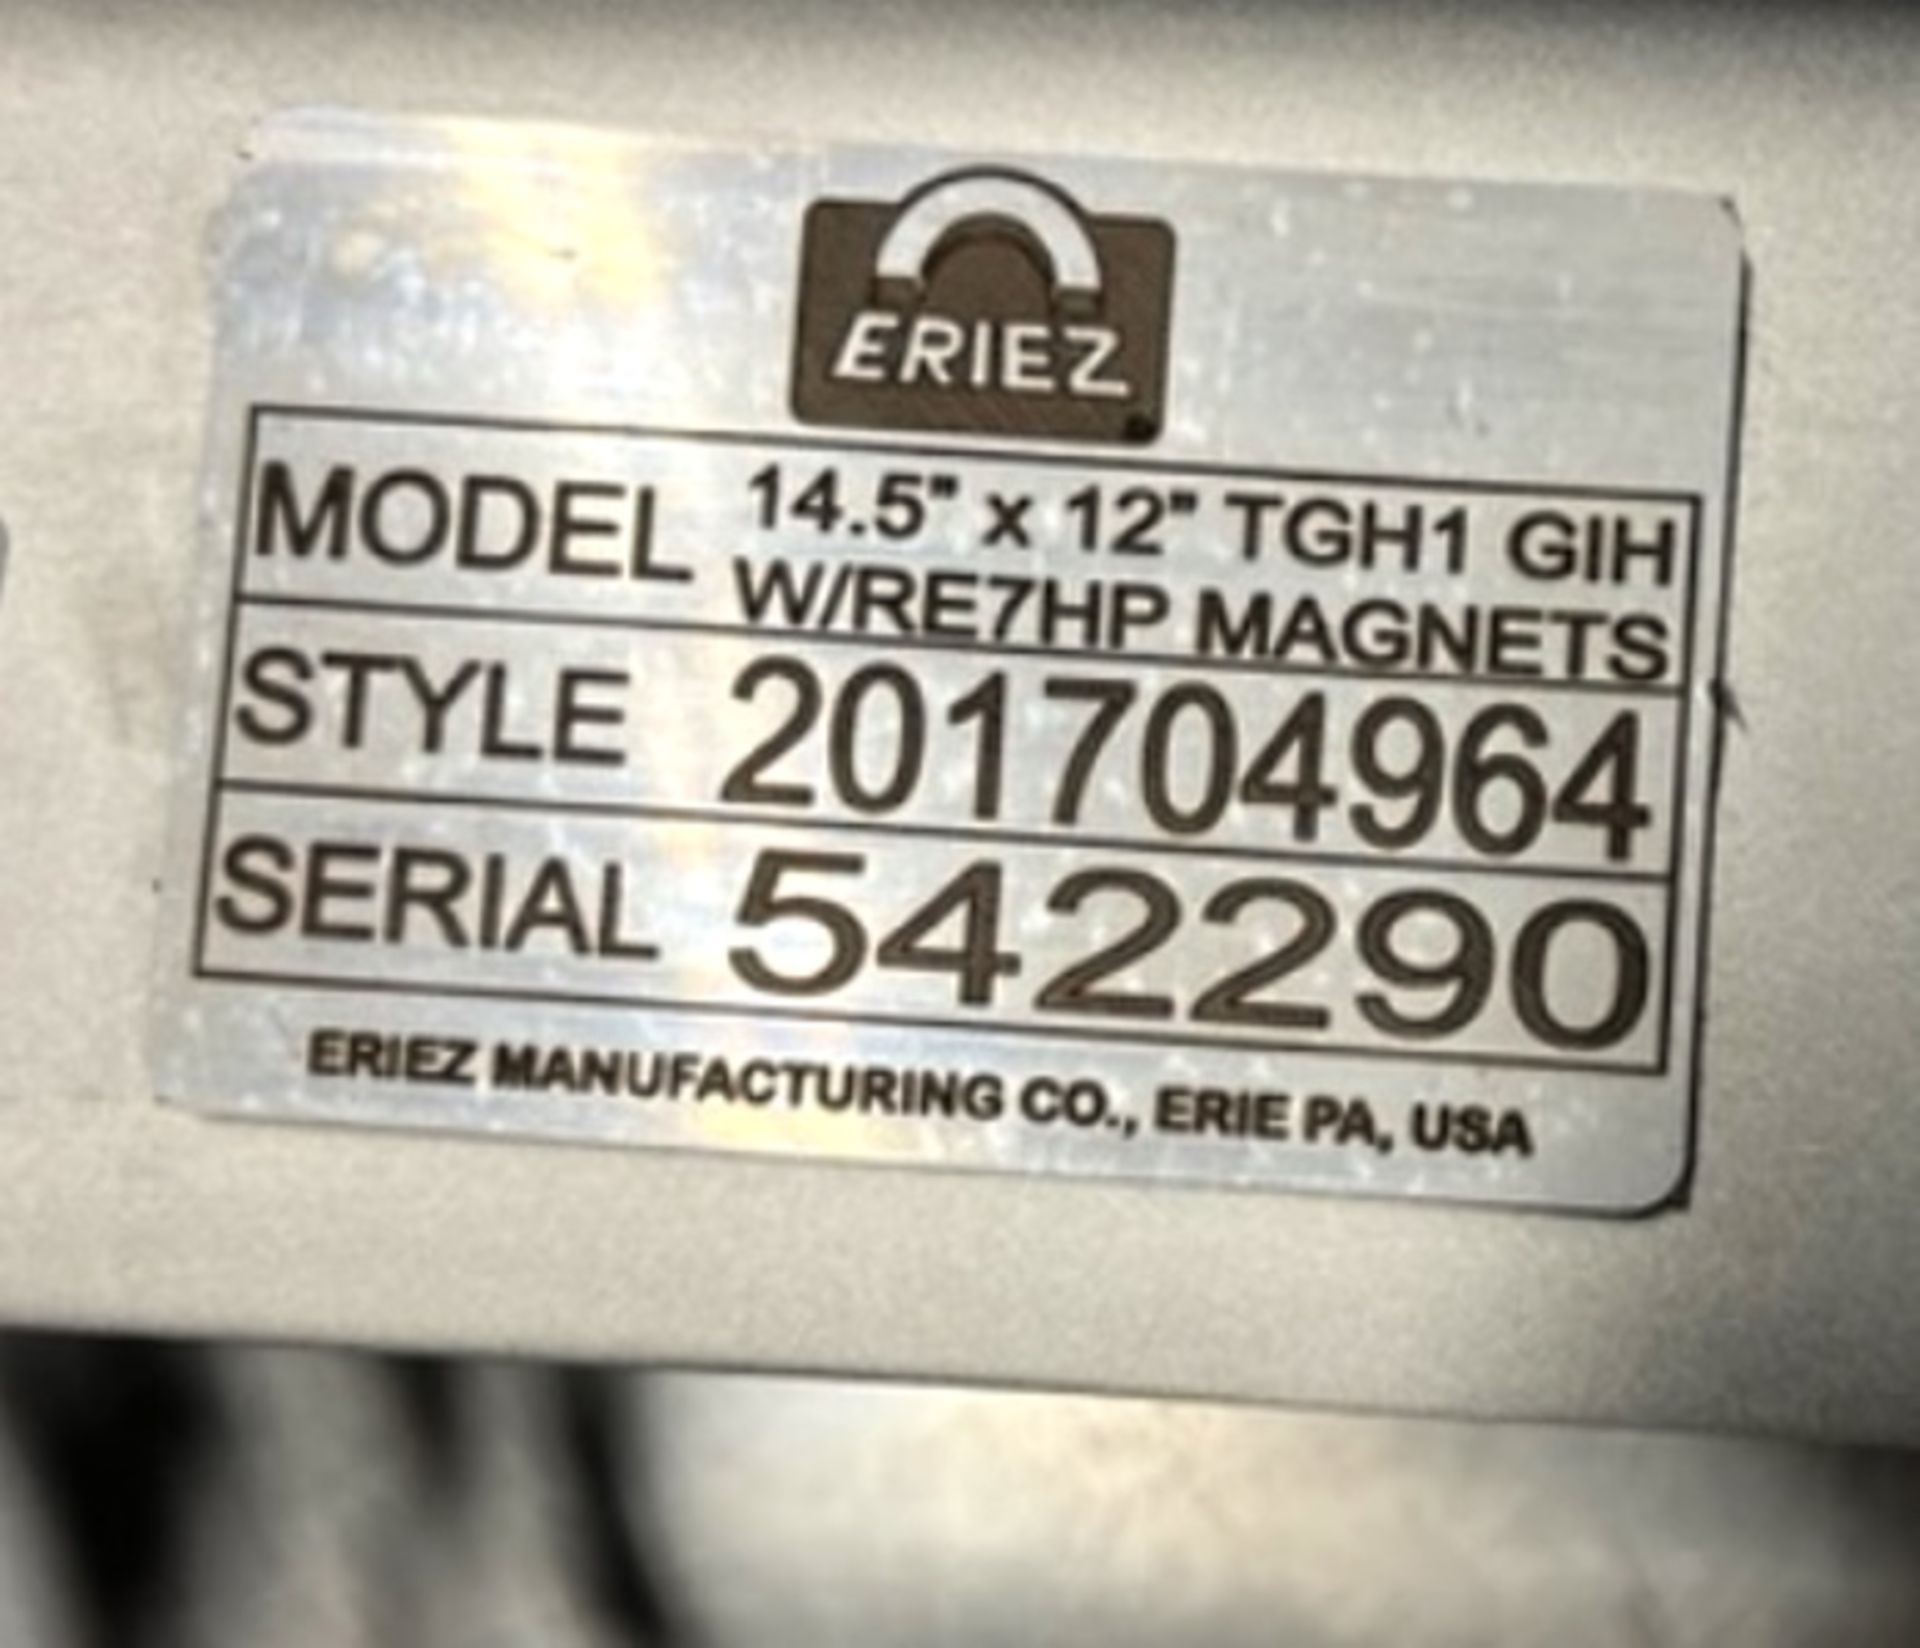 Eriez Model W/RE7HP grate magnets - Unused - Image 6 of 6